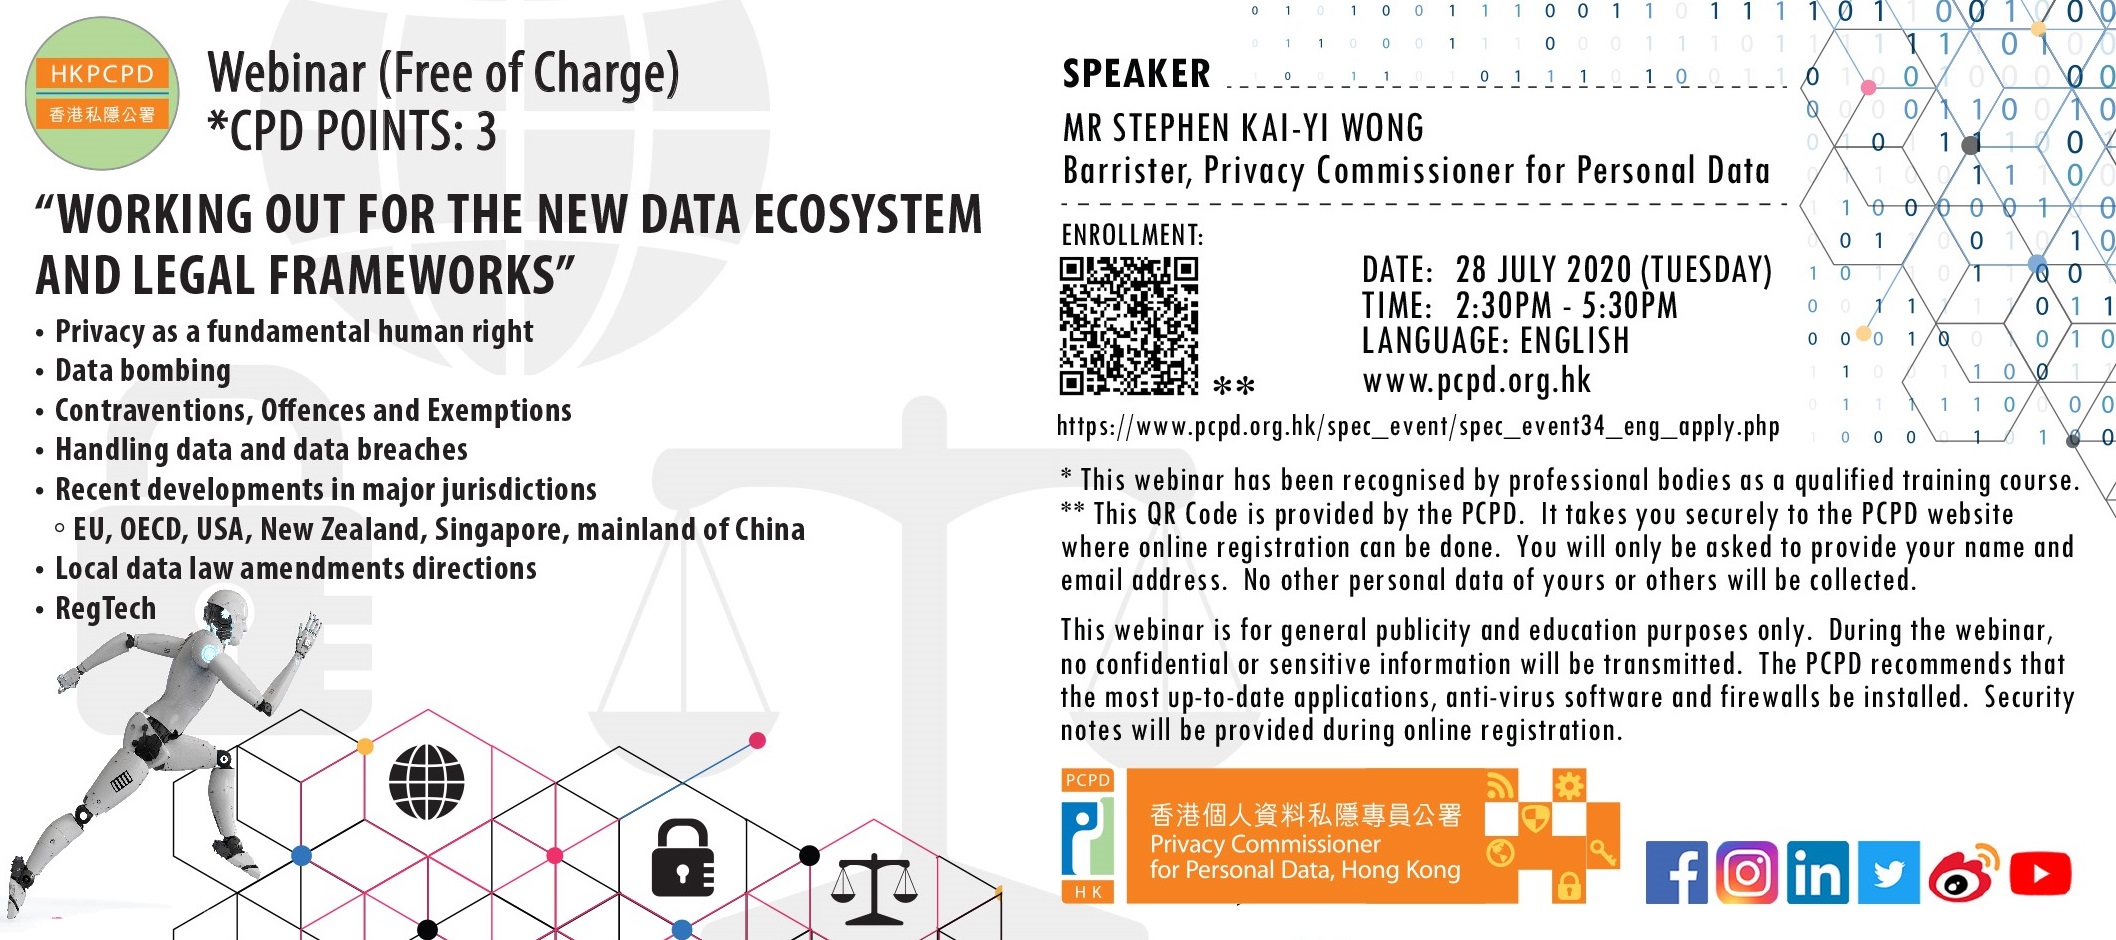 Seminar: Working out for the New Data Ecosystem and Legal Frameworks